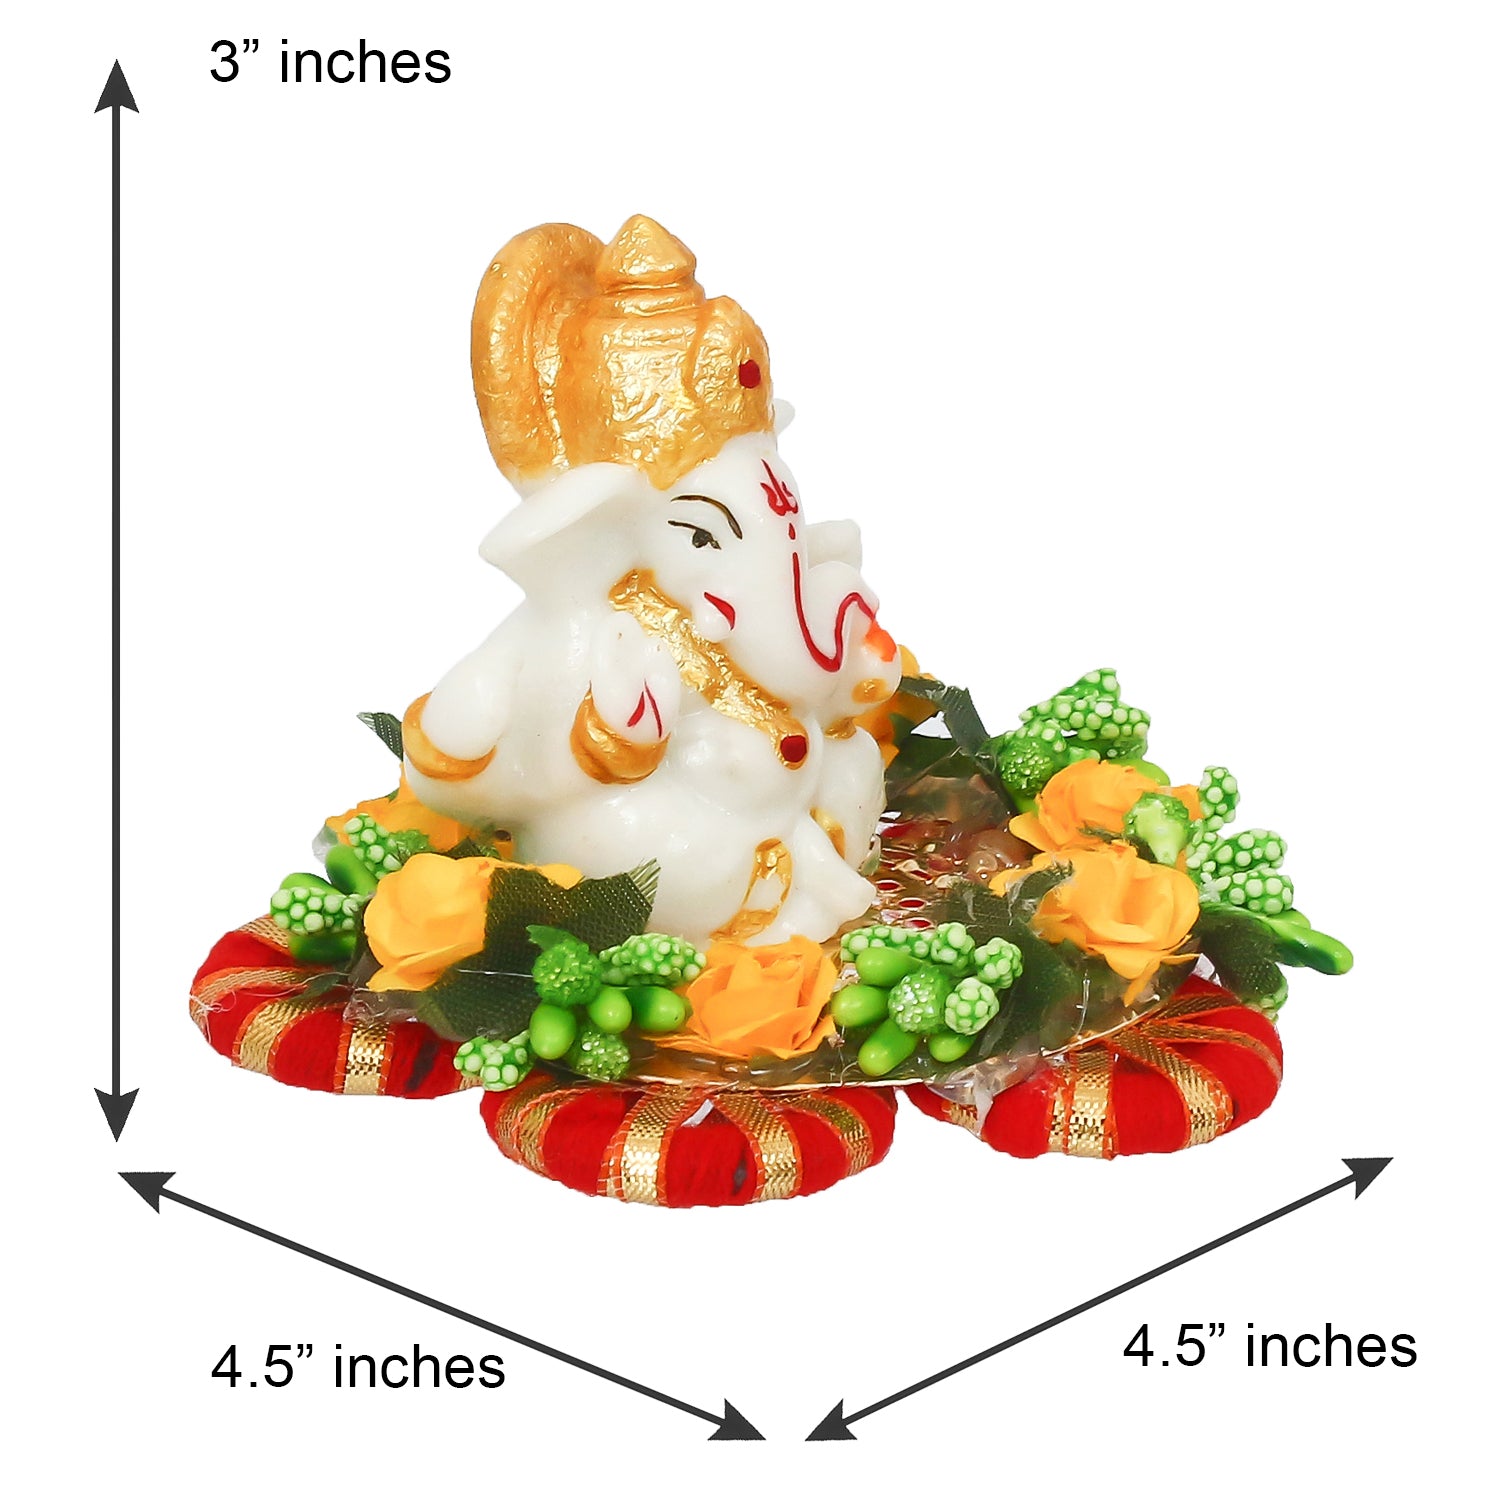 Lord Ganesha Idol On Decorative Handicrafted Plate For Home And Car Dashboard 2